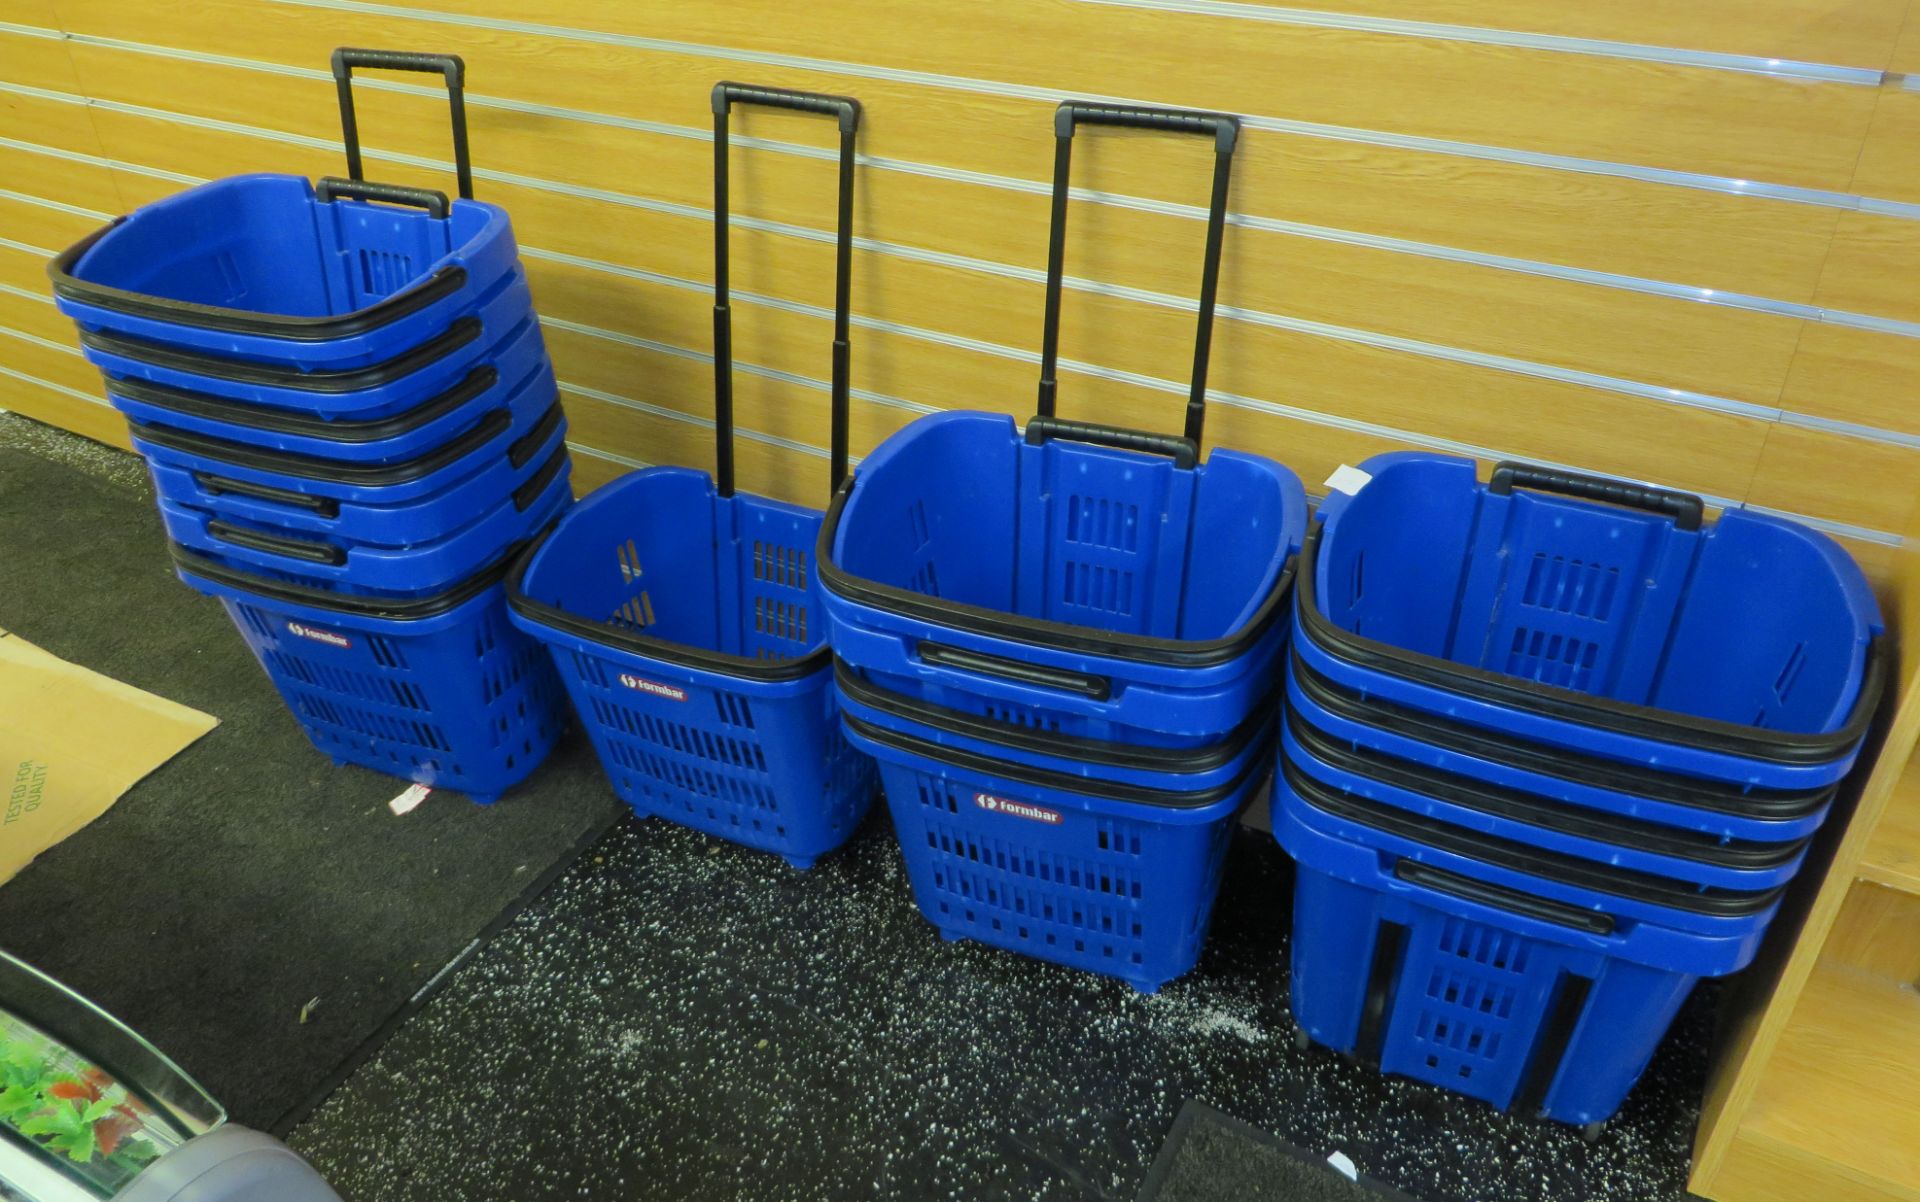 17 x Blue Wheeled Shopping Baskets with Extendable Handles - Ref: 023 - CL173 - Location: Altrincham